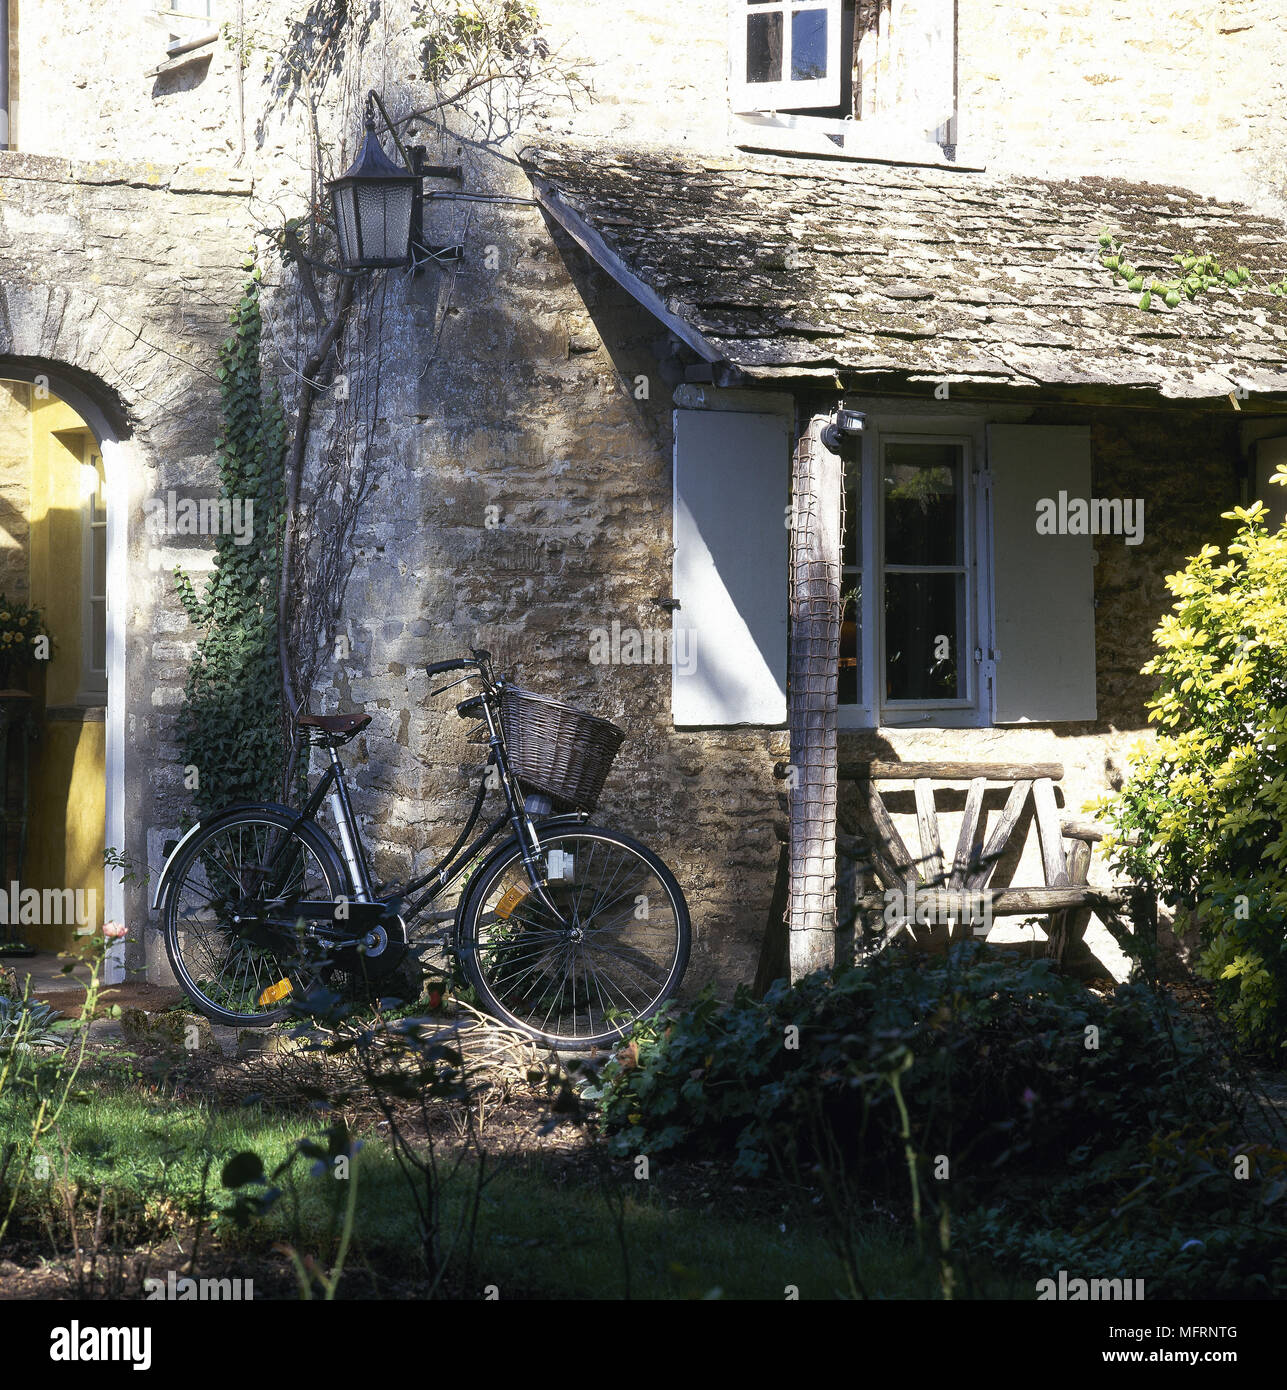 Exterior of stone cottage with covered patio area and bicycle leaning against wall, Stock Photo